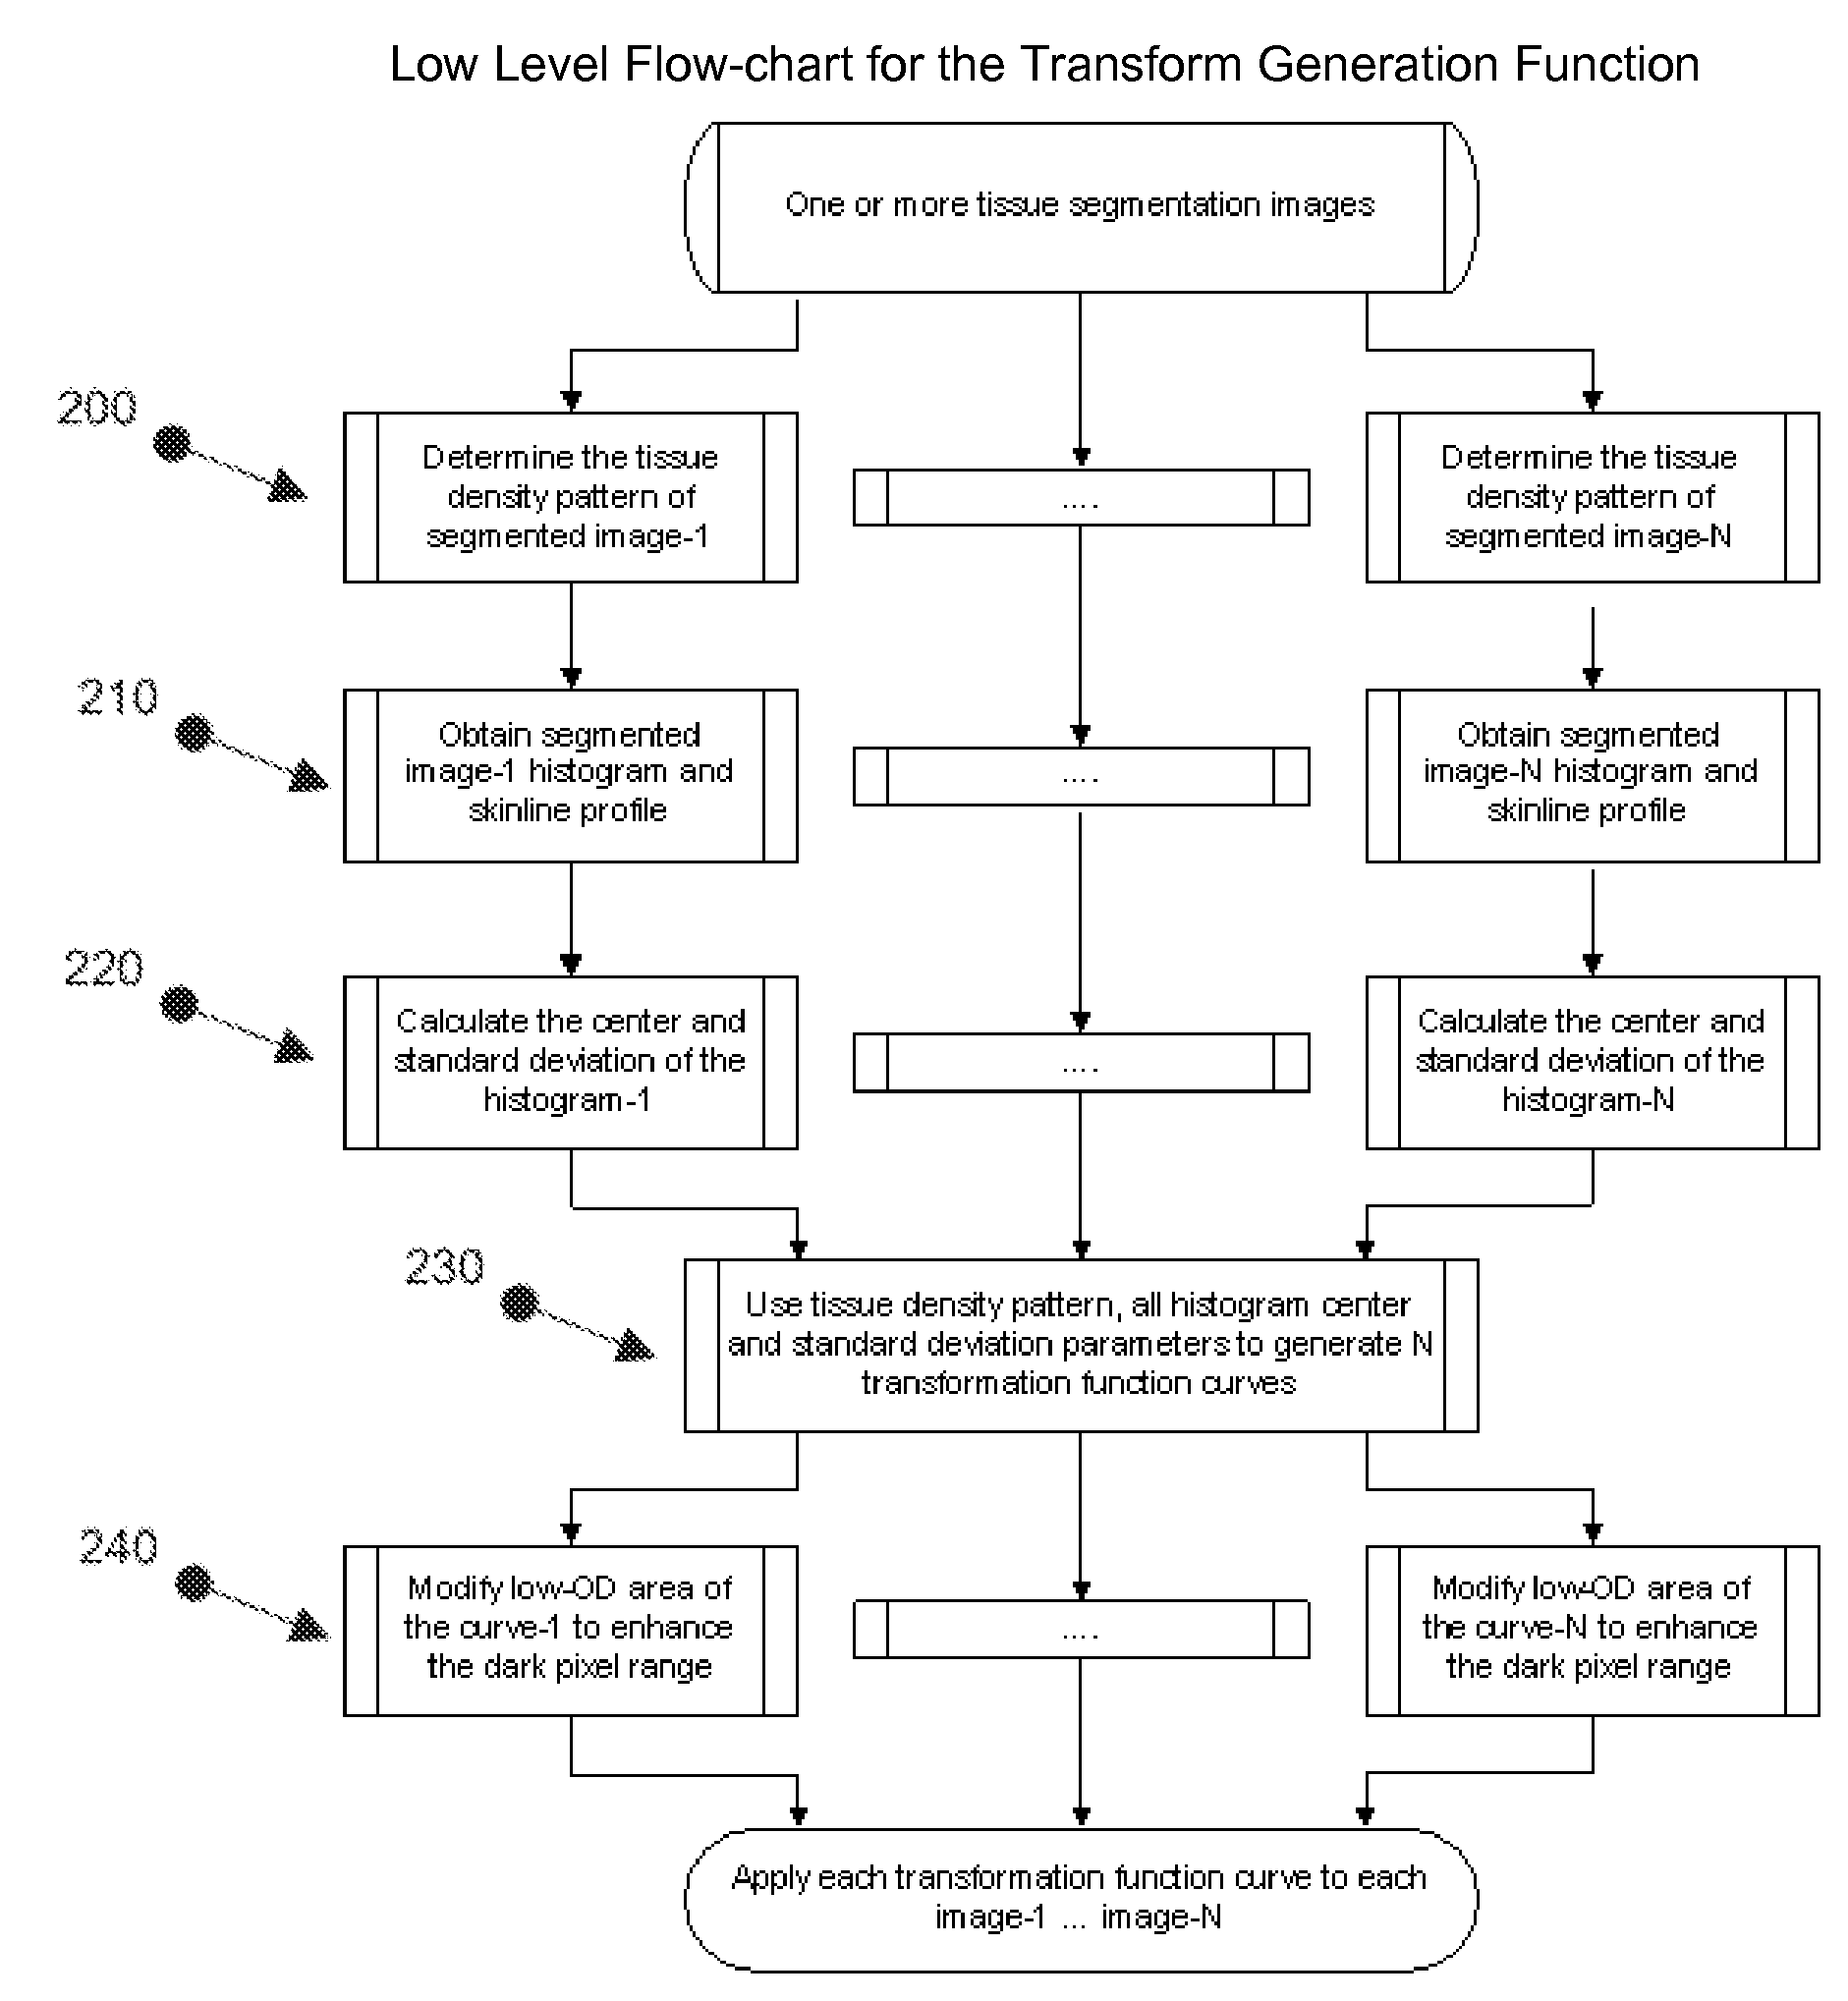 Image normalization for computer-aided detection, review and diagnosis